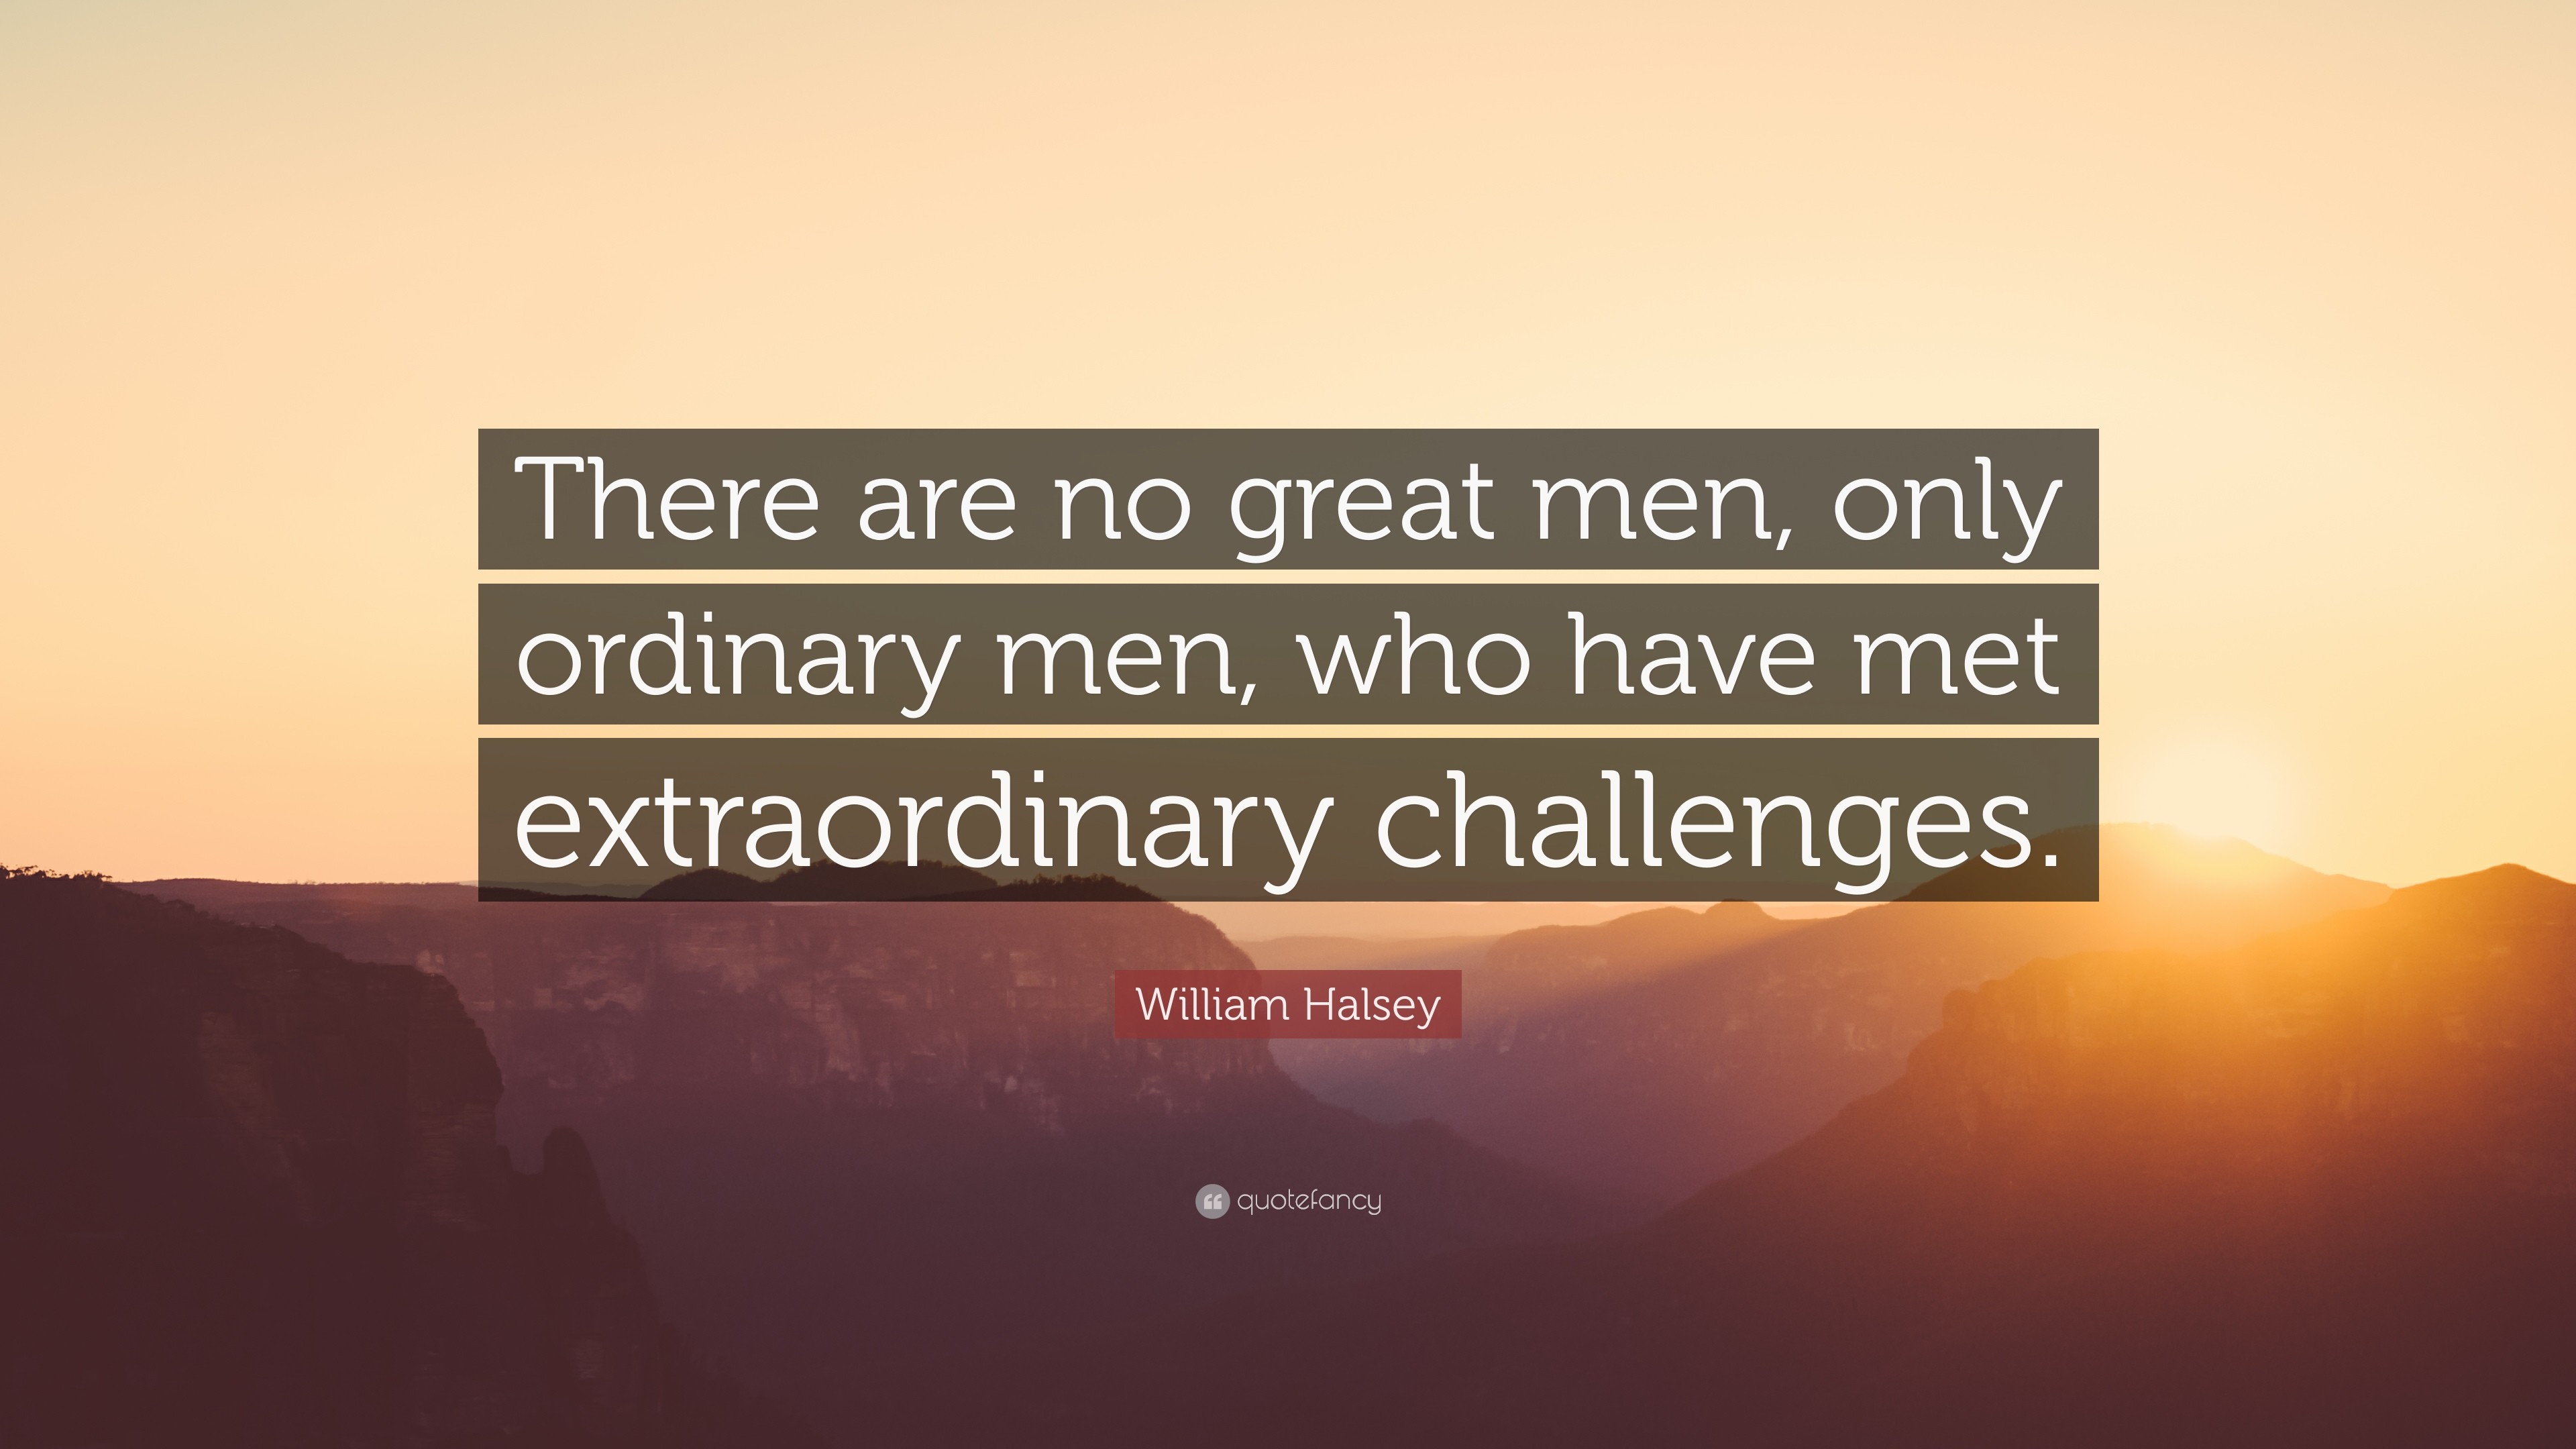 3840x2160 William Halsey Quote: “There are no great men, only ordinary men, who